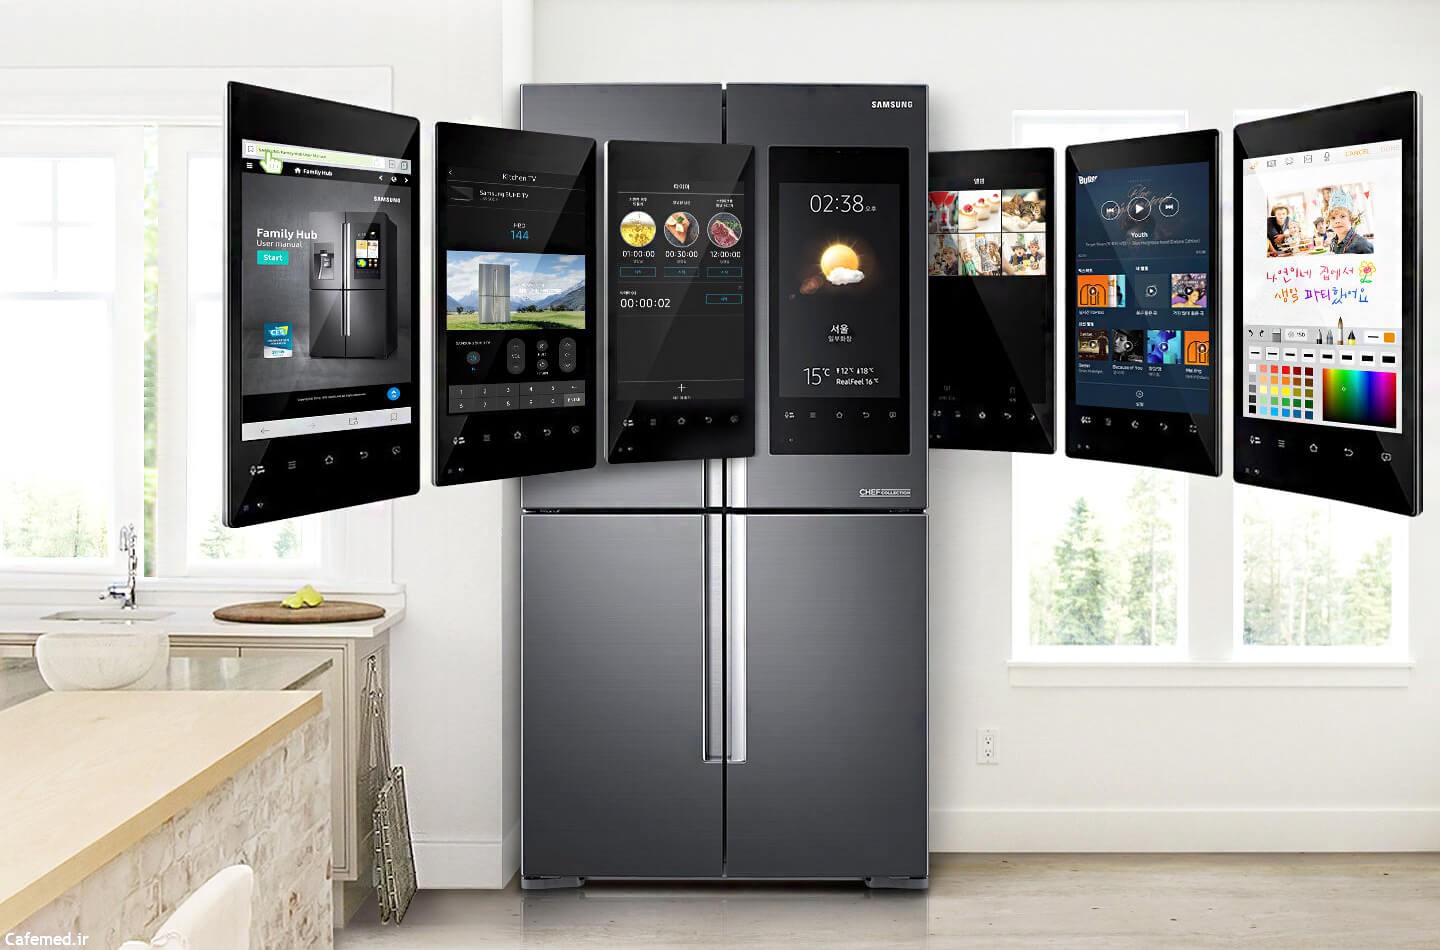 A refrigerator with multiple screens Description automatically generated